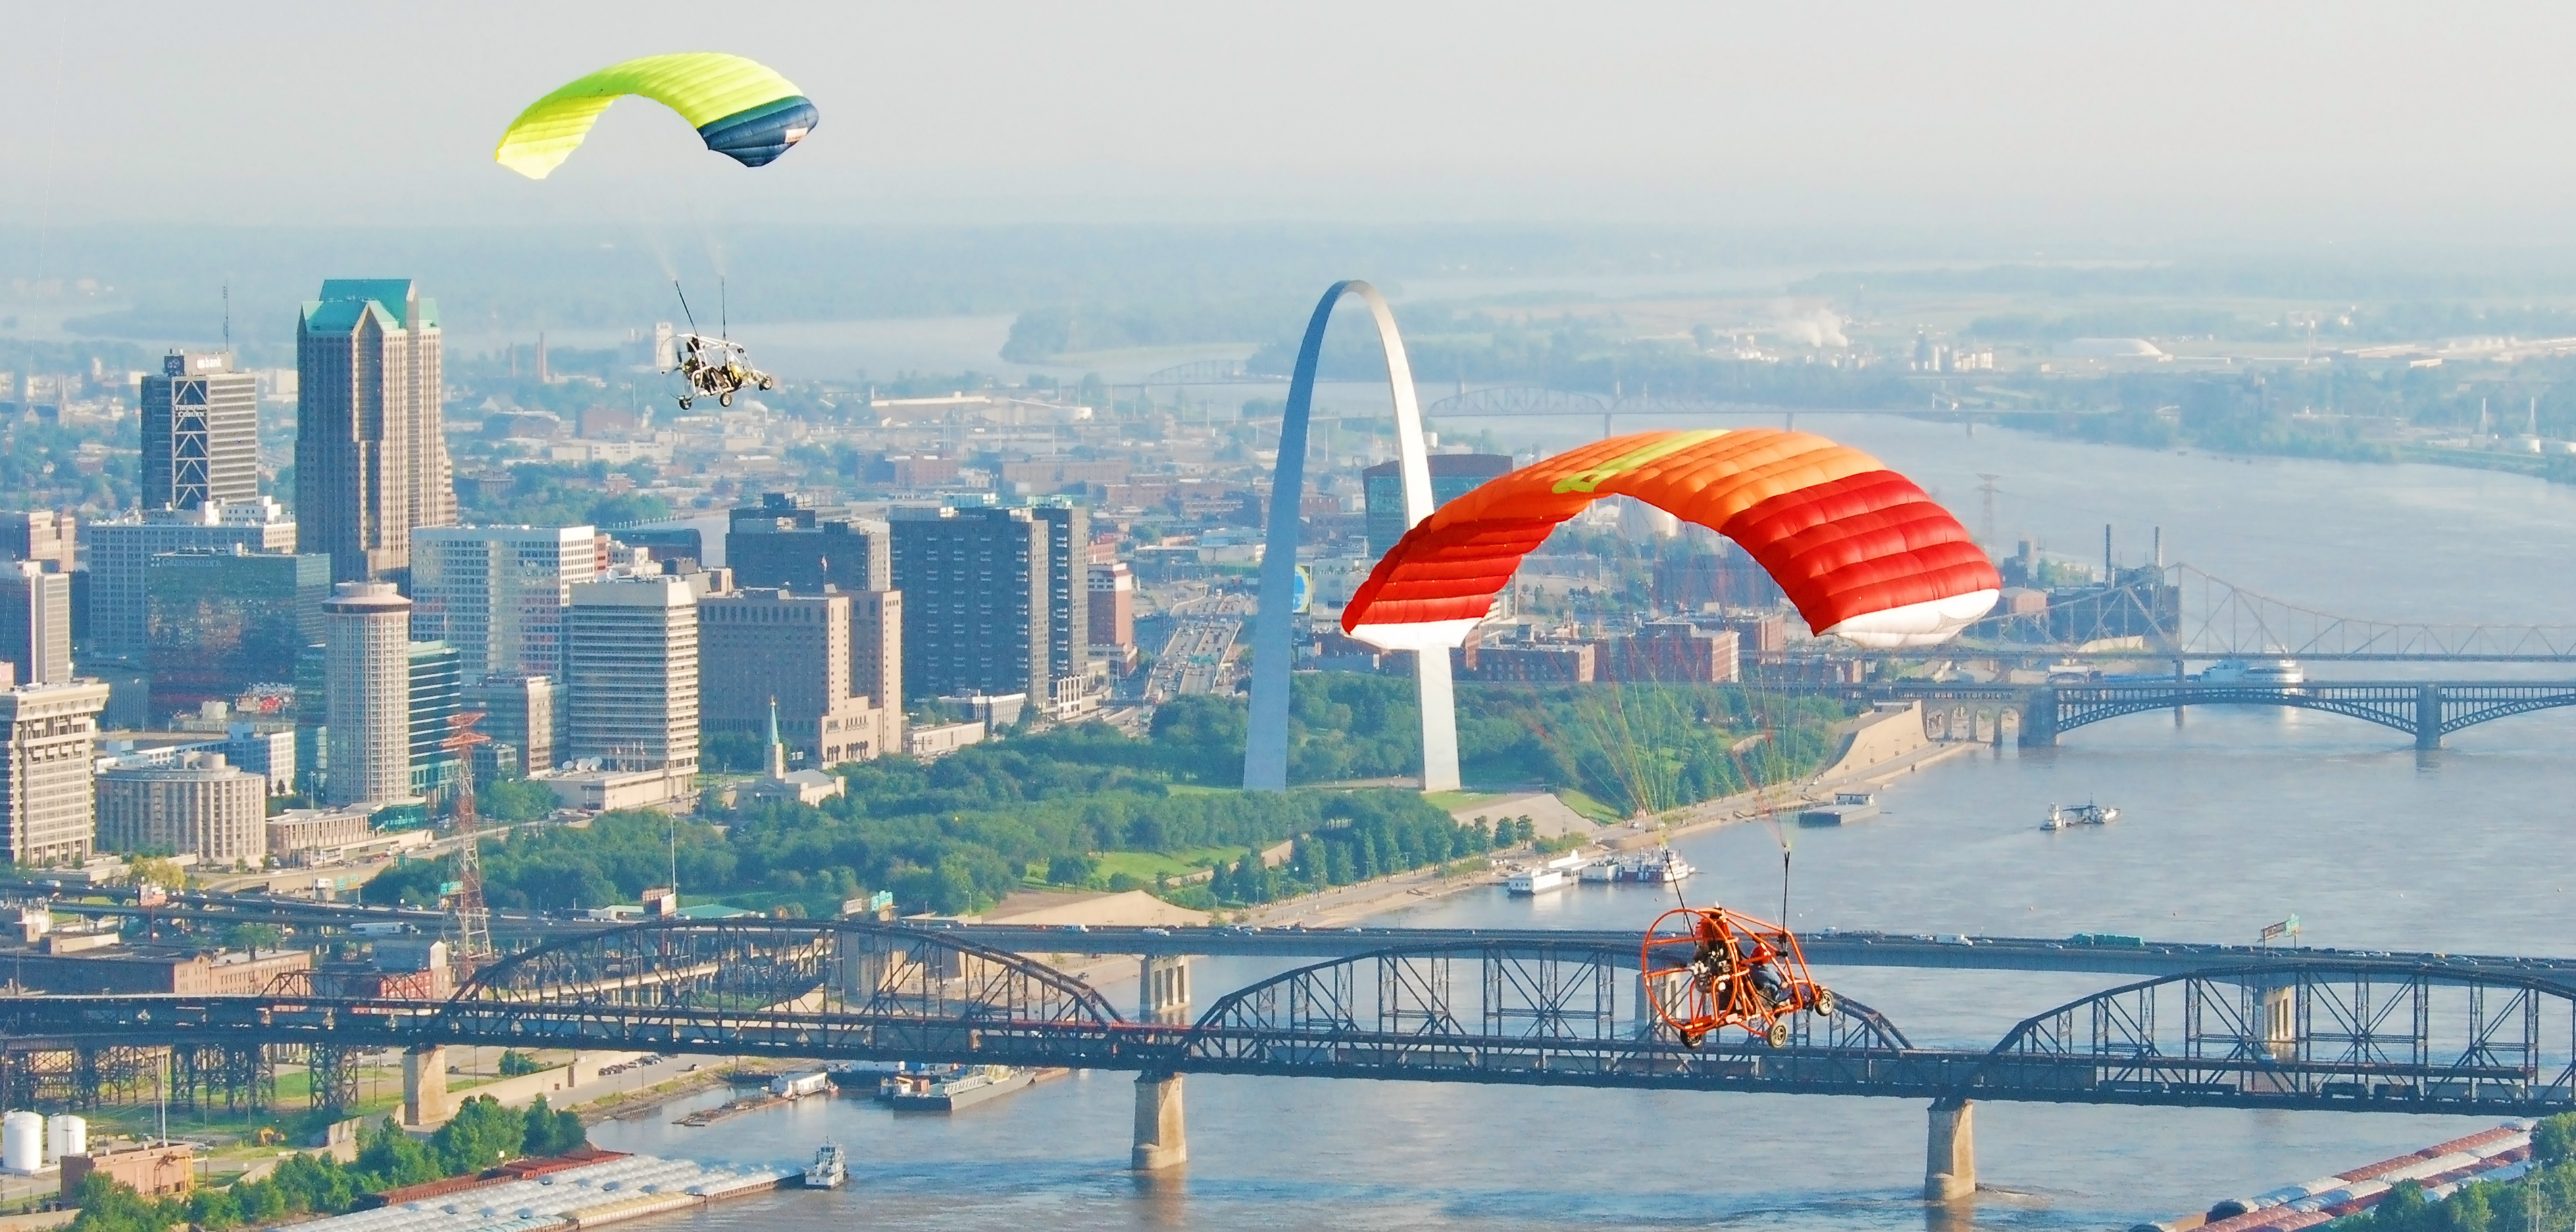 Powered Parachutes Flying by the St. Louis Gateway Arch